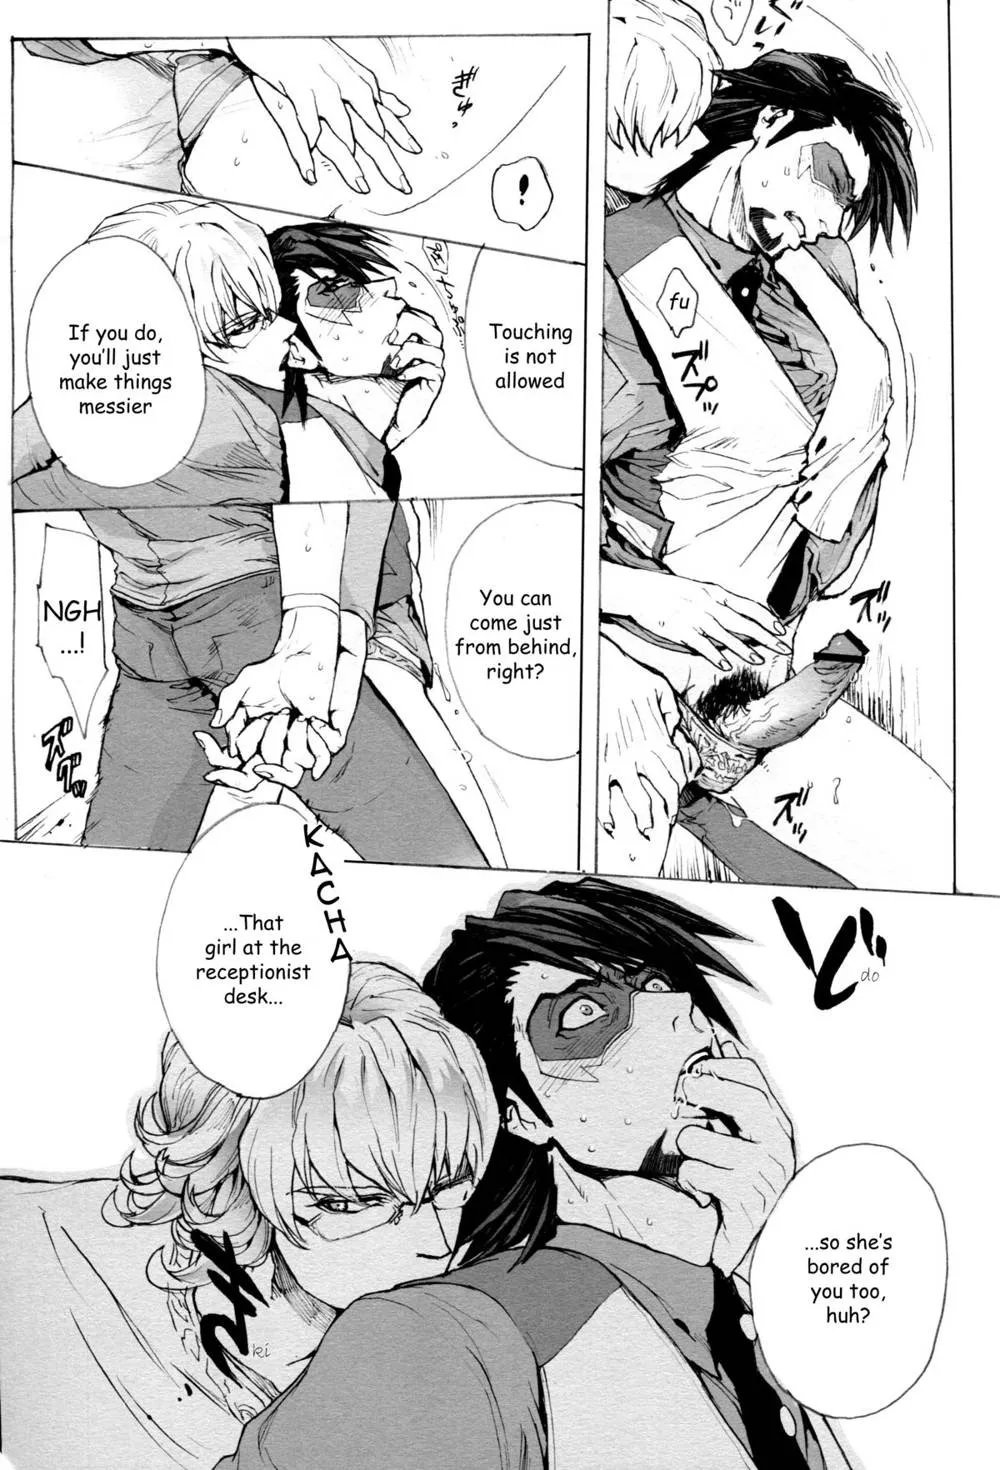 Tiger And Bunny,WAM – Wet And Messy [English][第10页]